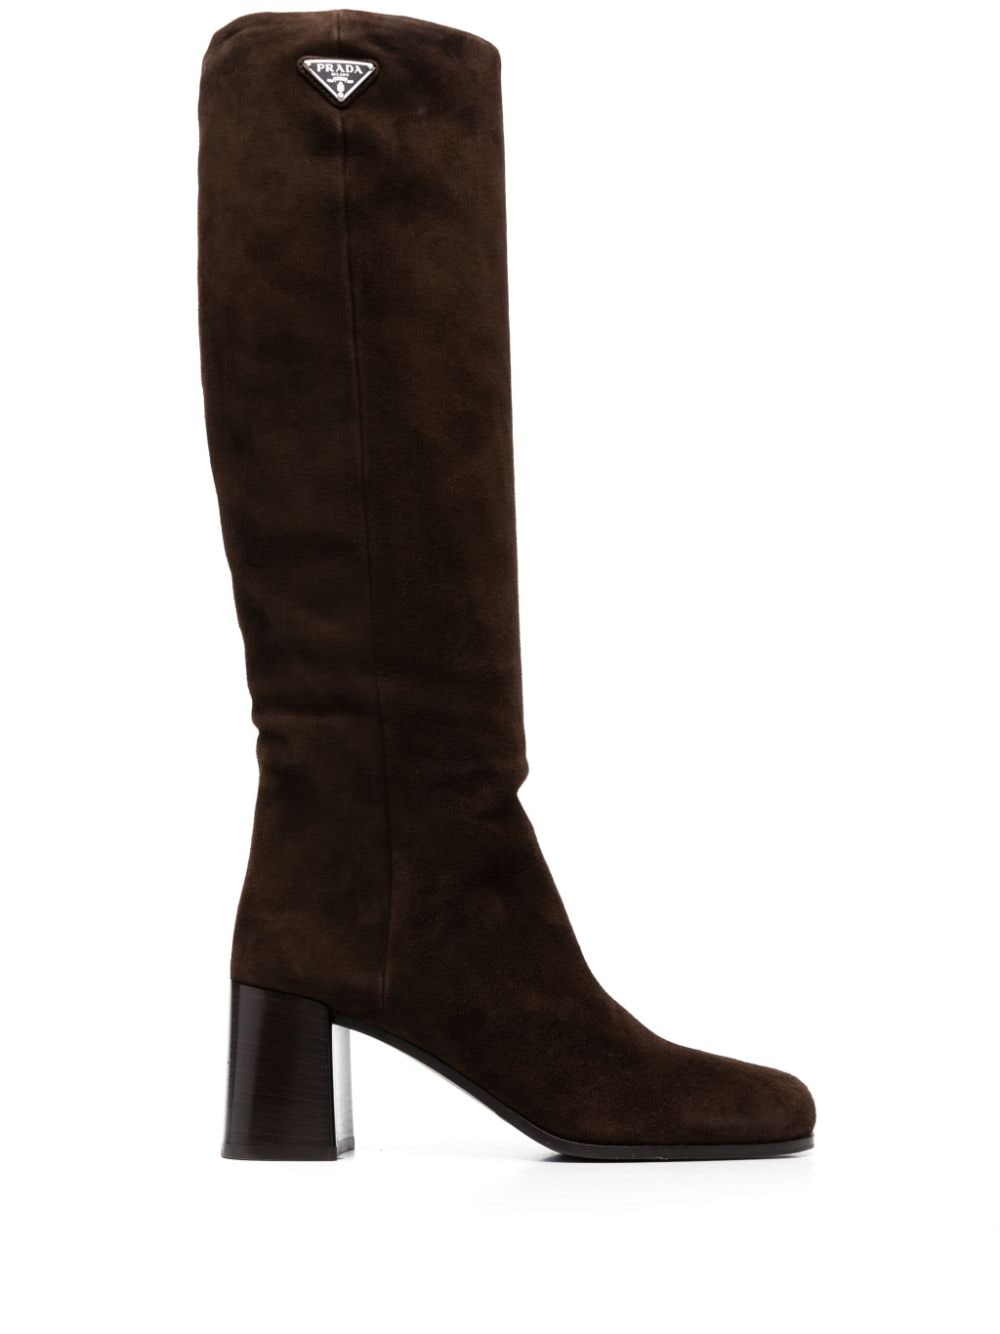 Prada 65mm knee-high leather boots - Brown